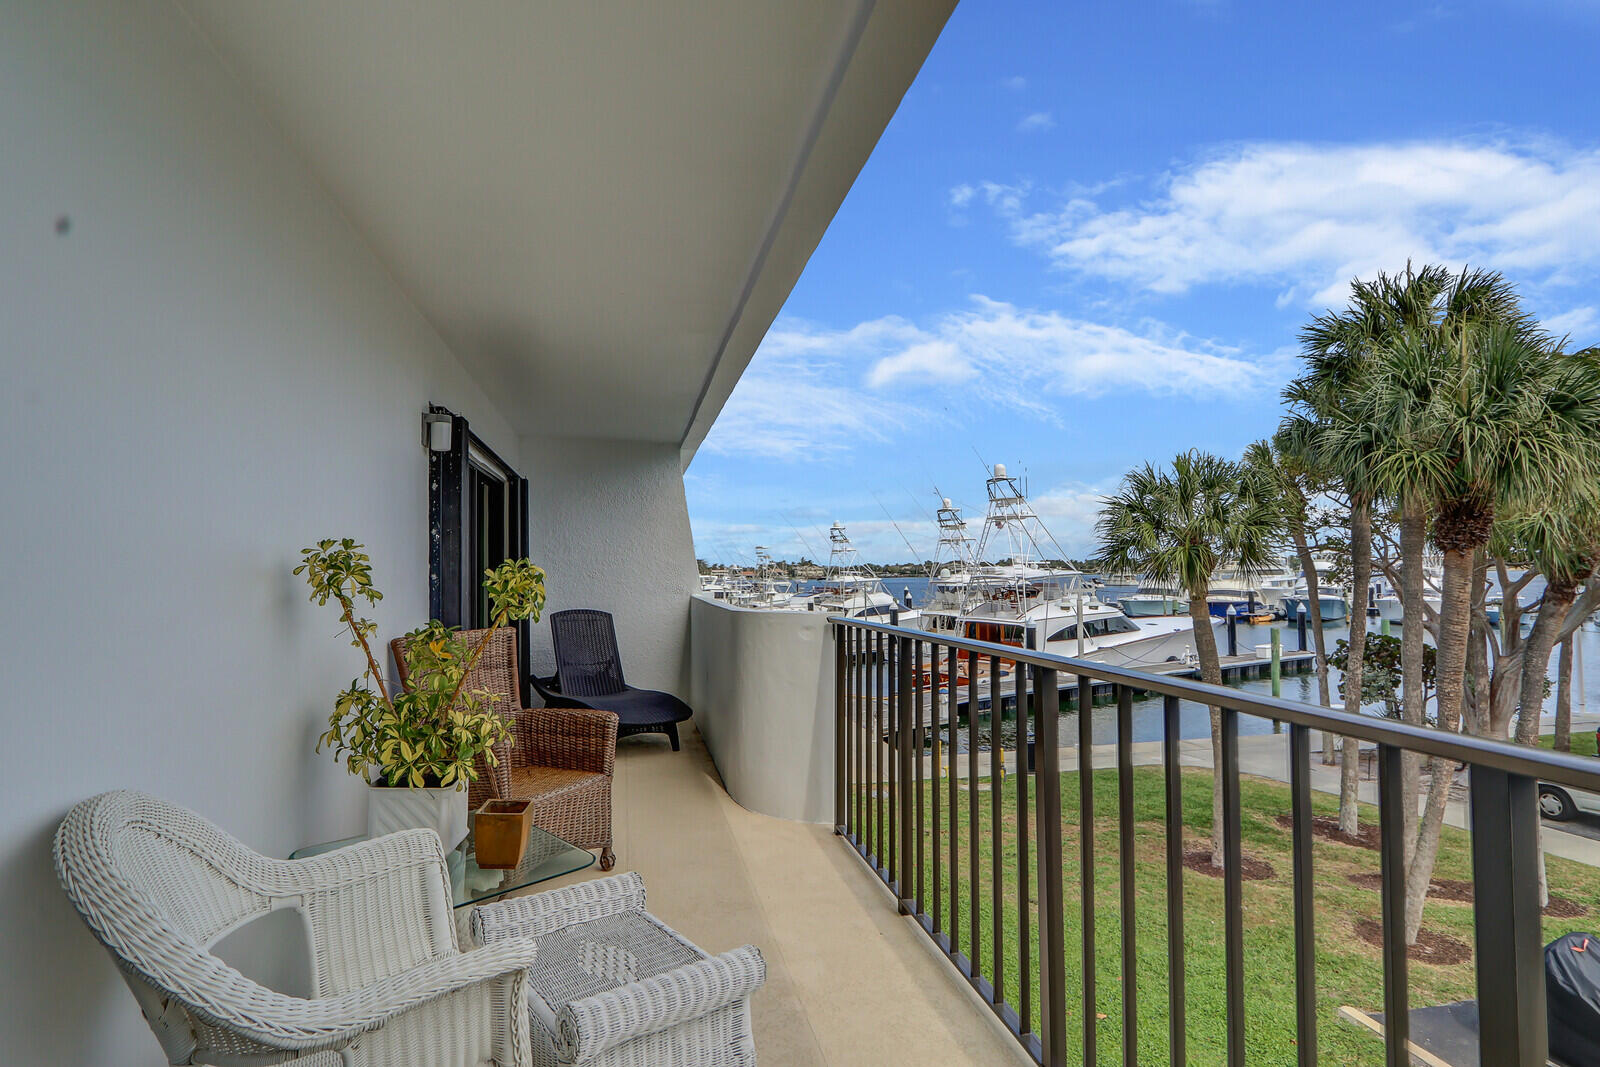 Marina and Intracoastal Views from this 2 bedroom split plan with an exceptional floor plan.  Wide Waterfront Balcony.  Steps to the marina and 2-mile waterfront walking path. Modern Kitchen Cabinets, Updated Primary Walk-in Shower. Lots of closet space.  This unit currently does not have a washer & dryer, but the building allows you to put them in.  Garage parking spot. Extra wide great room and kitchen can be opened up to the main living space.  New impact sliders in Living Room and both bedrooms. Walk to Belle's Marina Restaurant.  Steps to the heated pool, community rooms and tennis court.